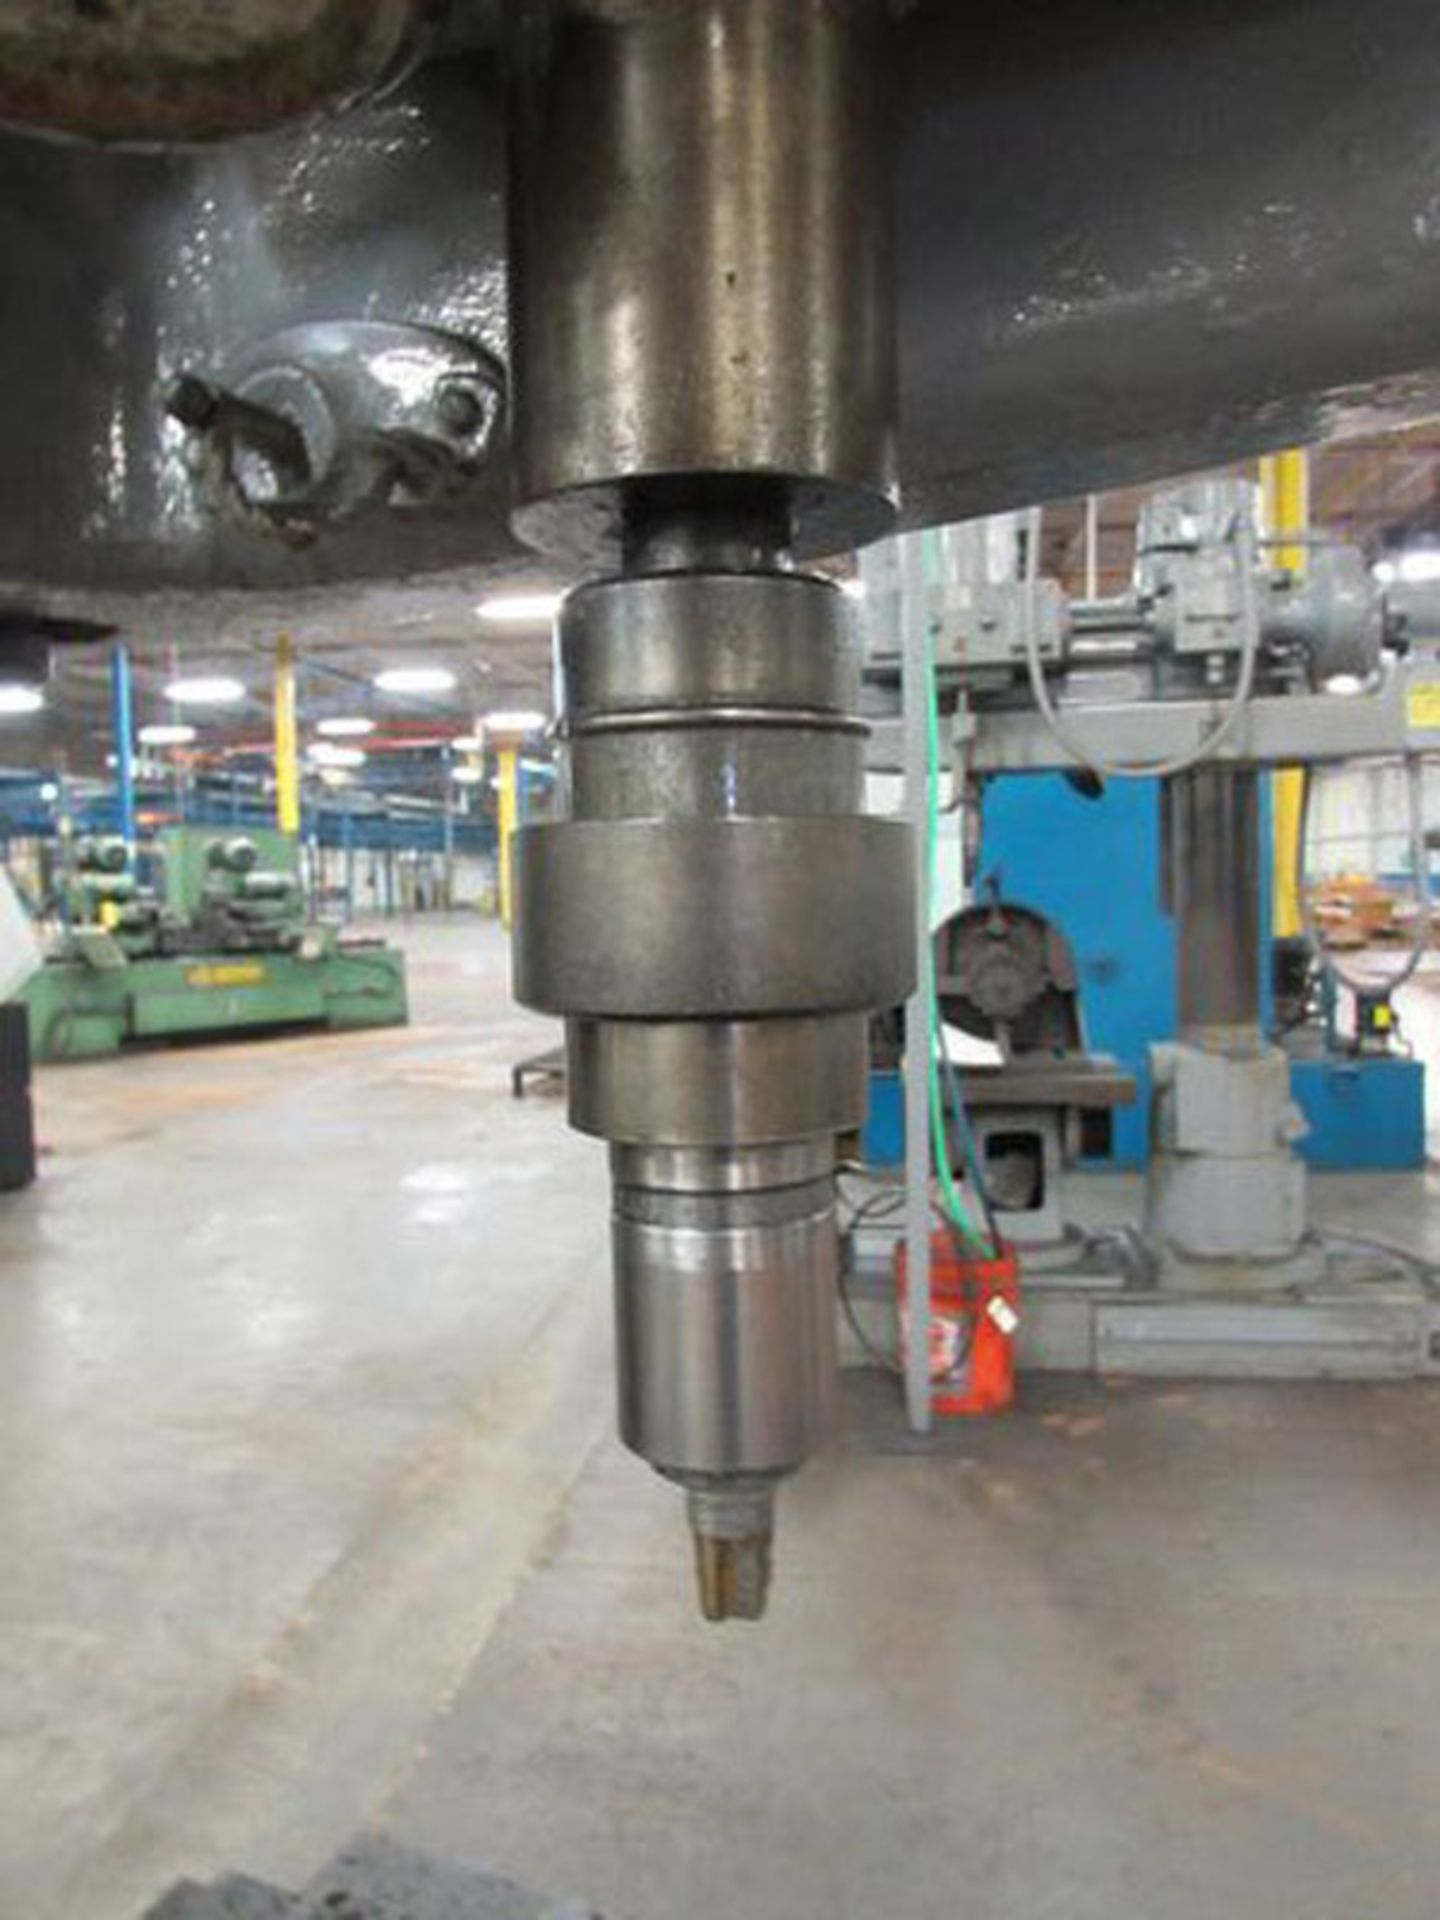 Cincinnati Bickford - Radial Arm Drill | 3' x 9", Located In Painesville, OH - 6966P - Image 3 of 3